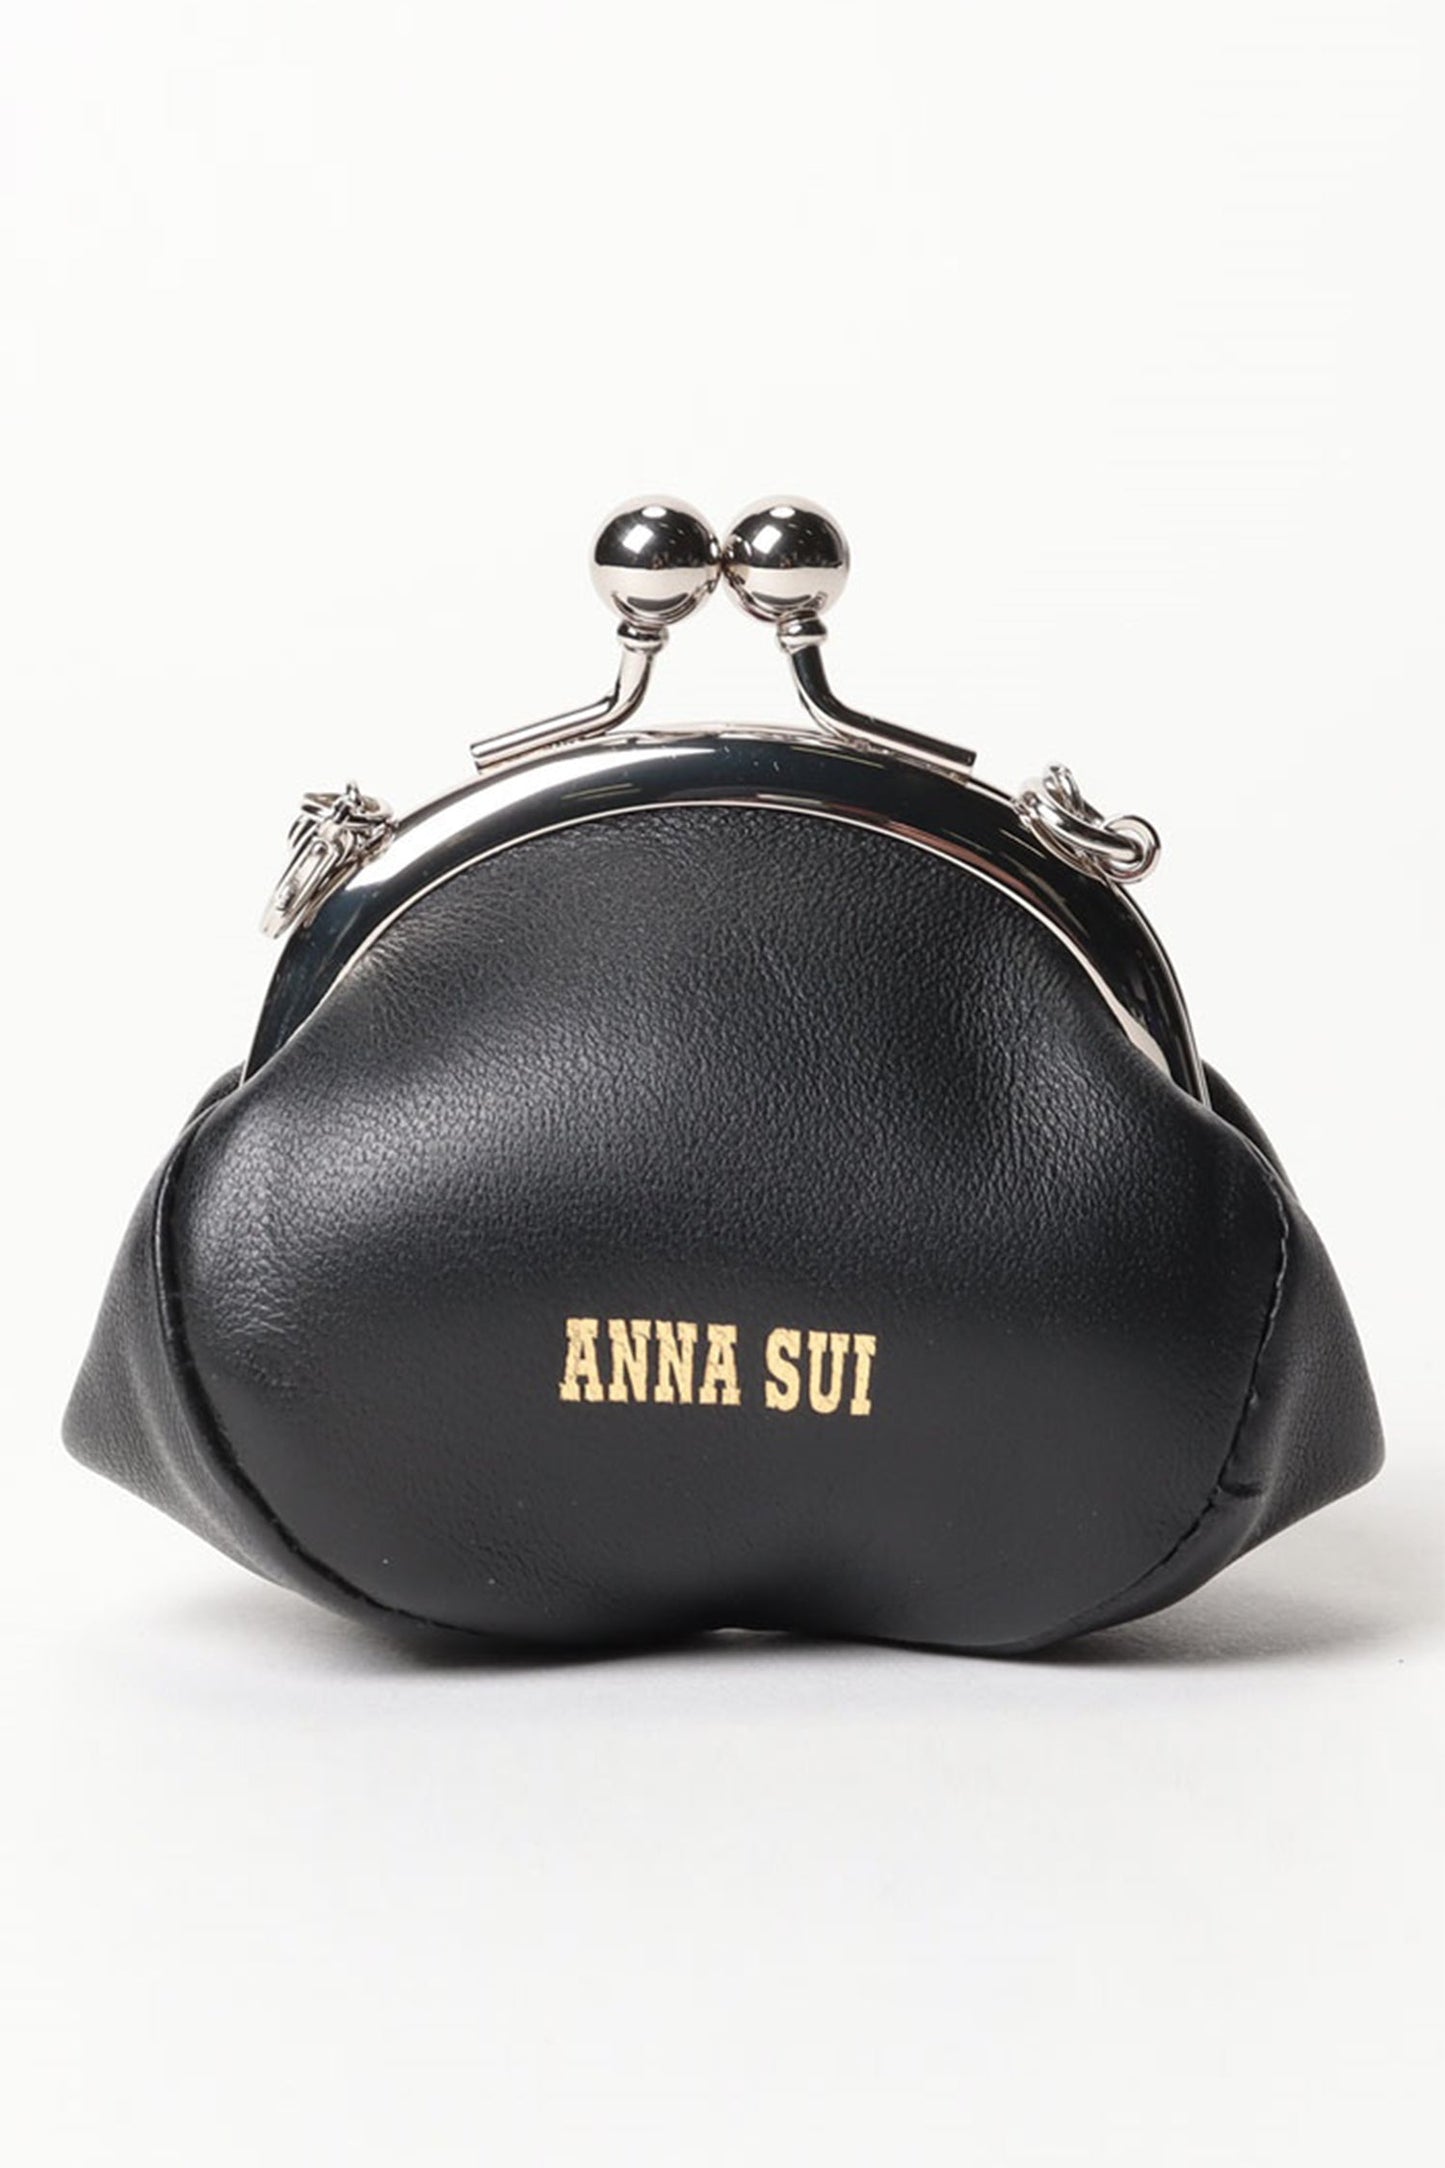 On the black side of the Candy Charm Mini Purse Black, Anna Sui logo in golden fonts